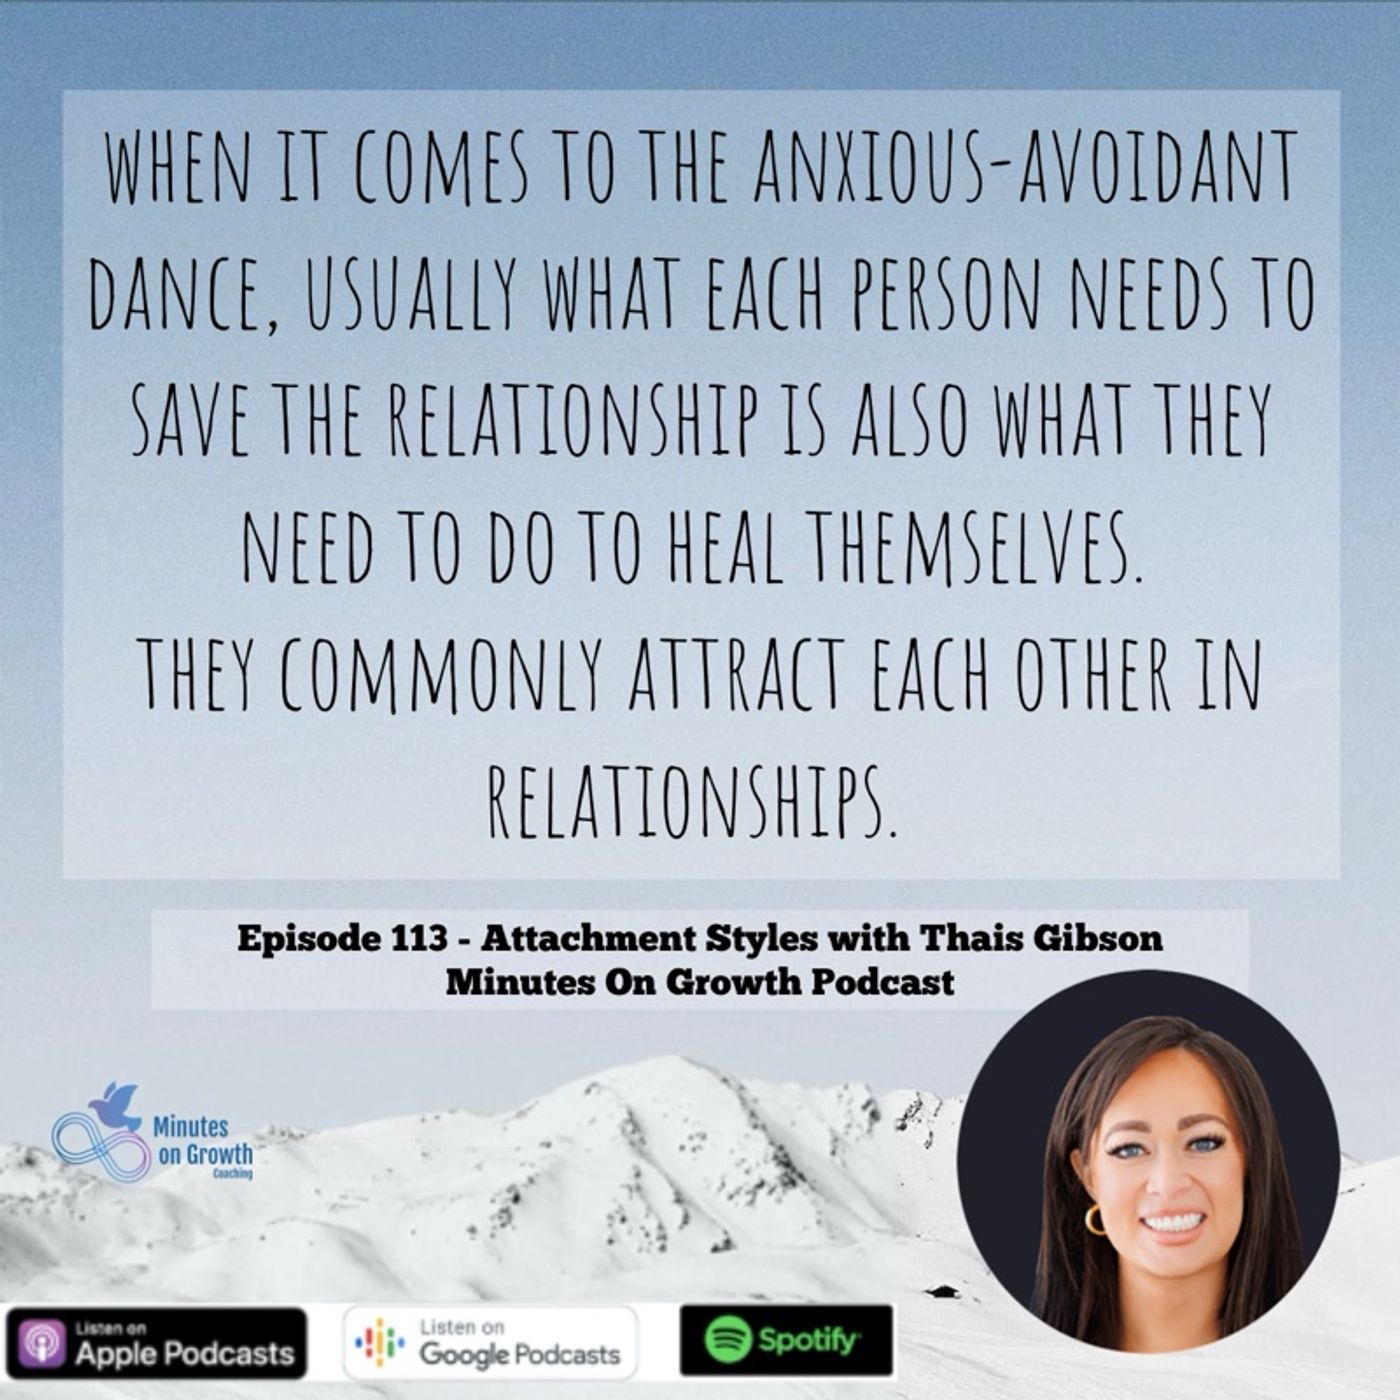 Episode 113: Attachment Styles with Thais Gibson